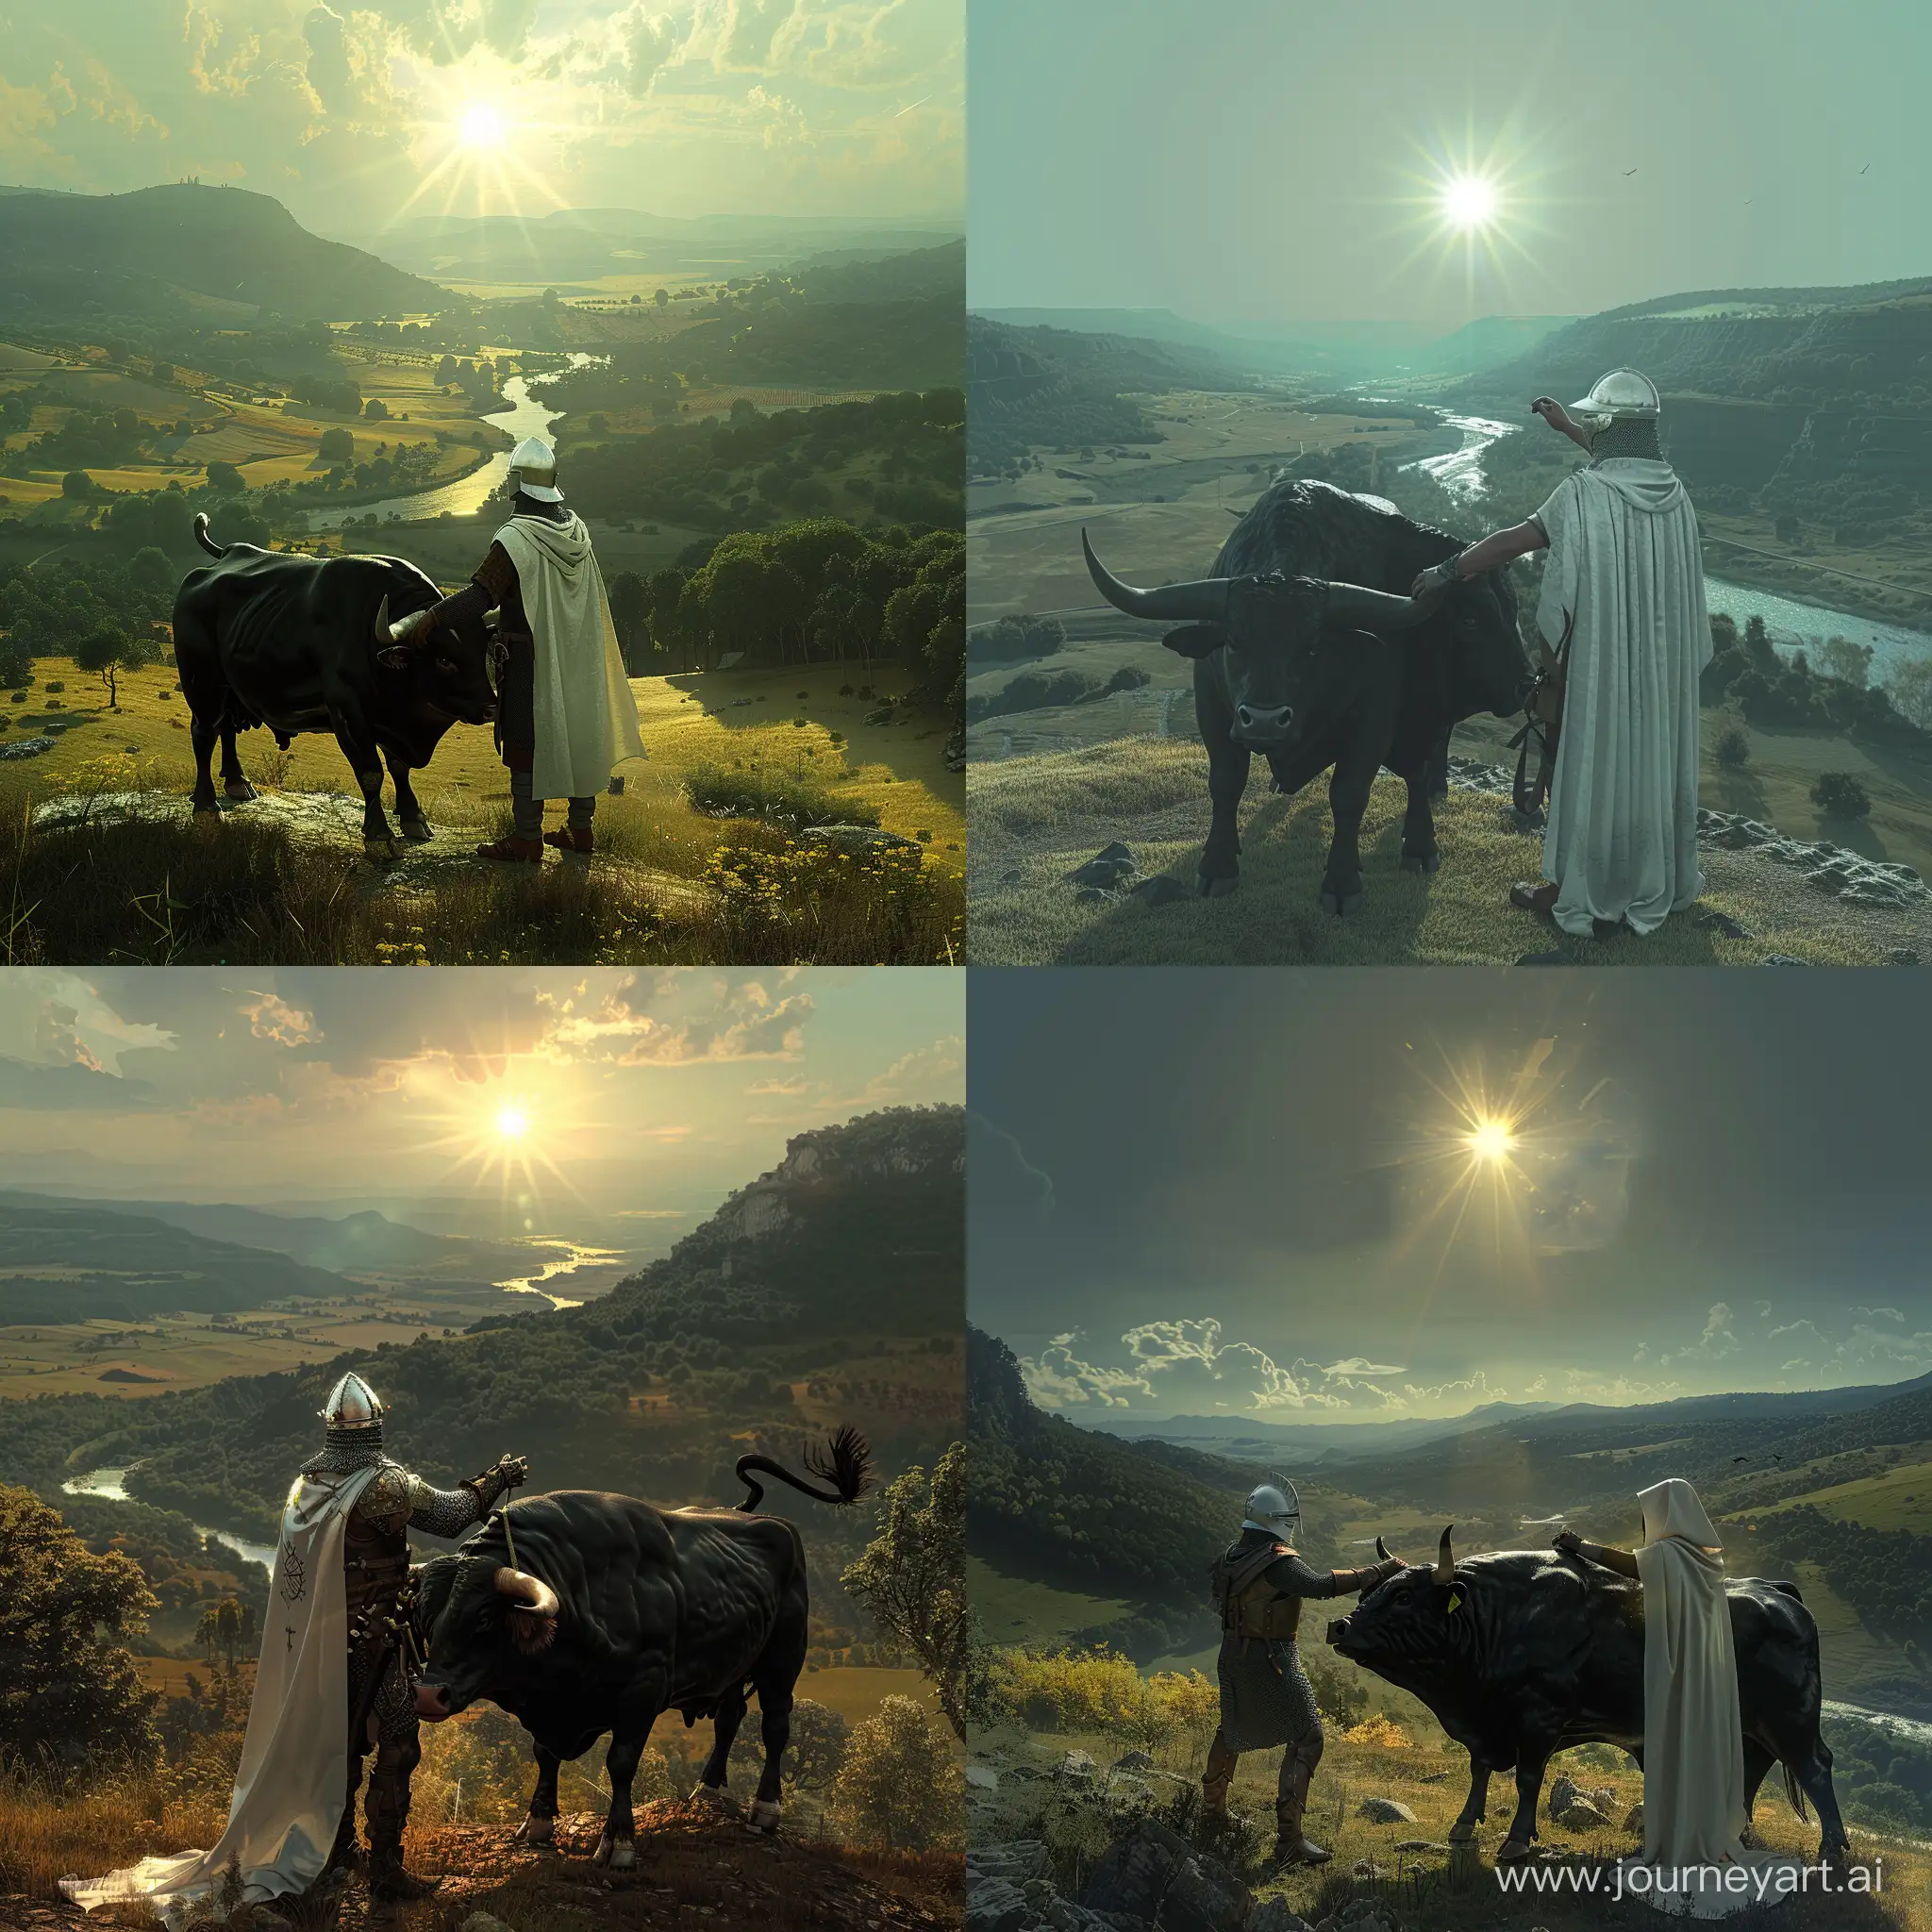 Knight-in-White-Cloak-Petting-Black-Bull-on-Hilltop-with-Sunlit-Valley